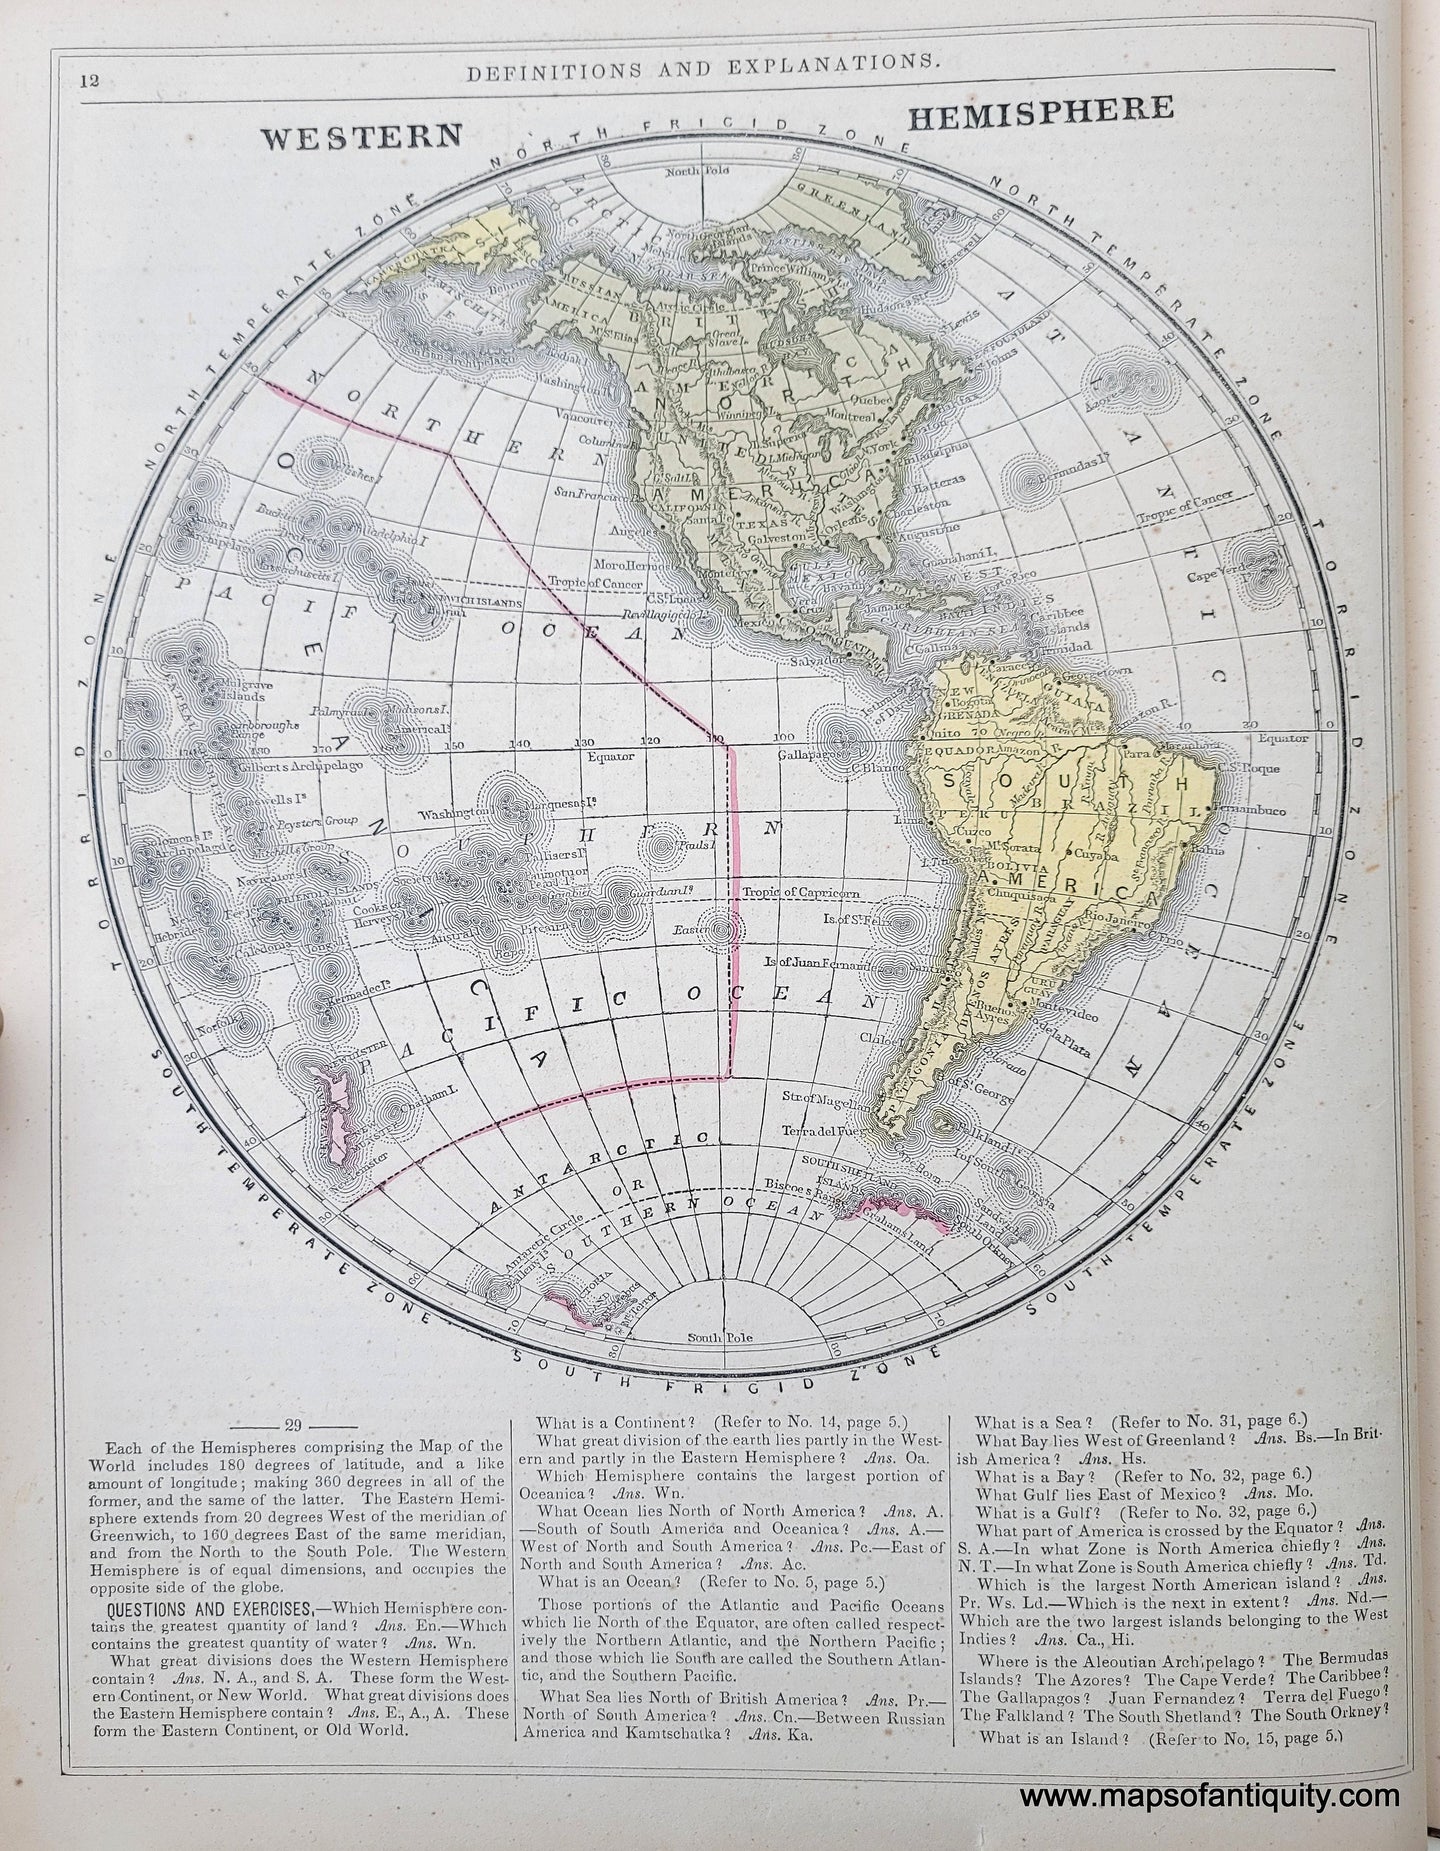 Genuine-Antique-Hand-Colored-Map-Western-Hemisphere-1850-Mitchell-Thomas-Cowperthwait-Co--Maps-Of-Antiquity